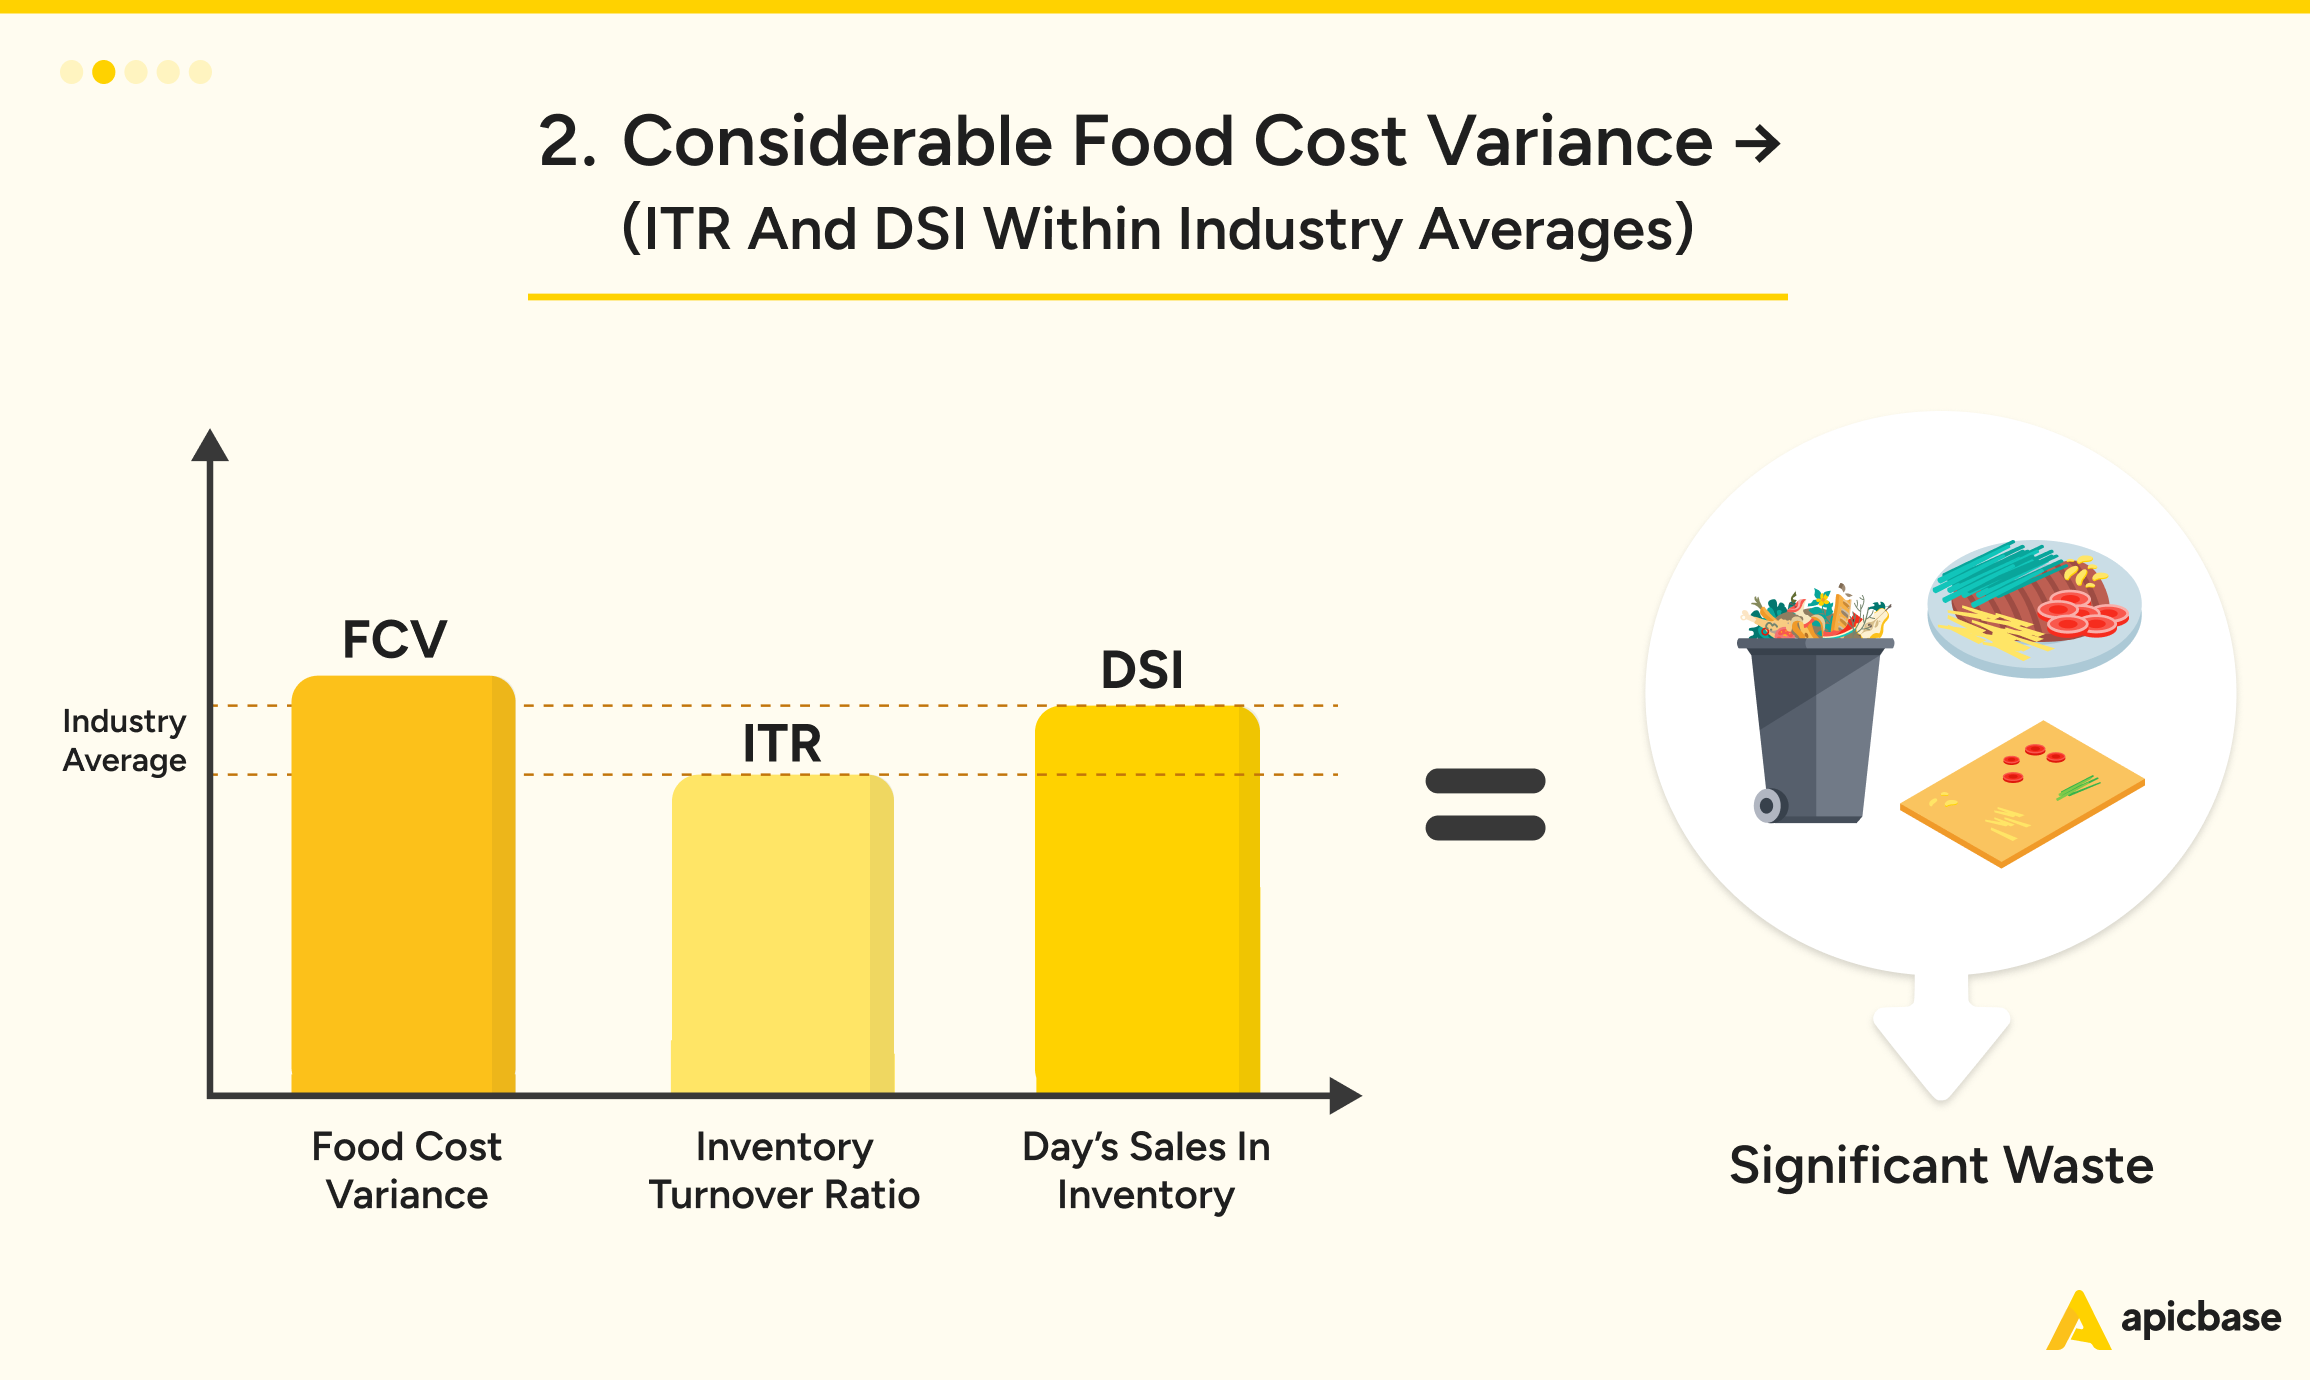 Restaurant Inventory Considerable food cost variance